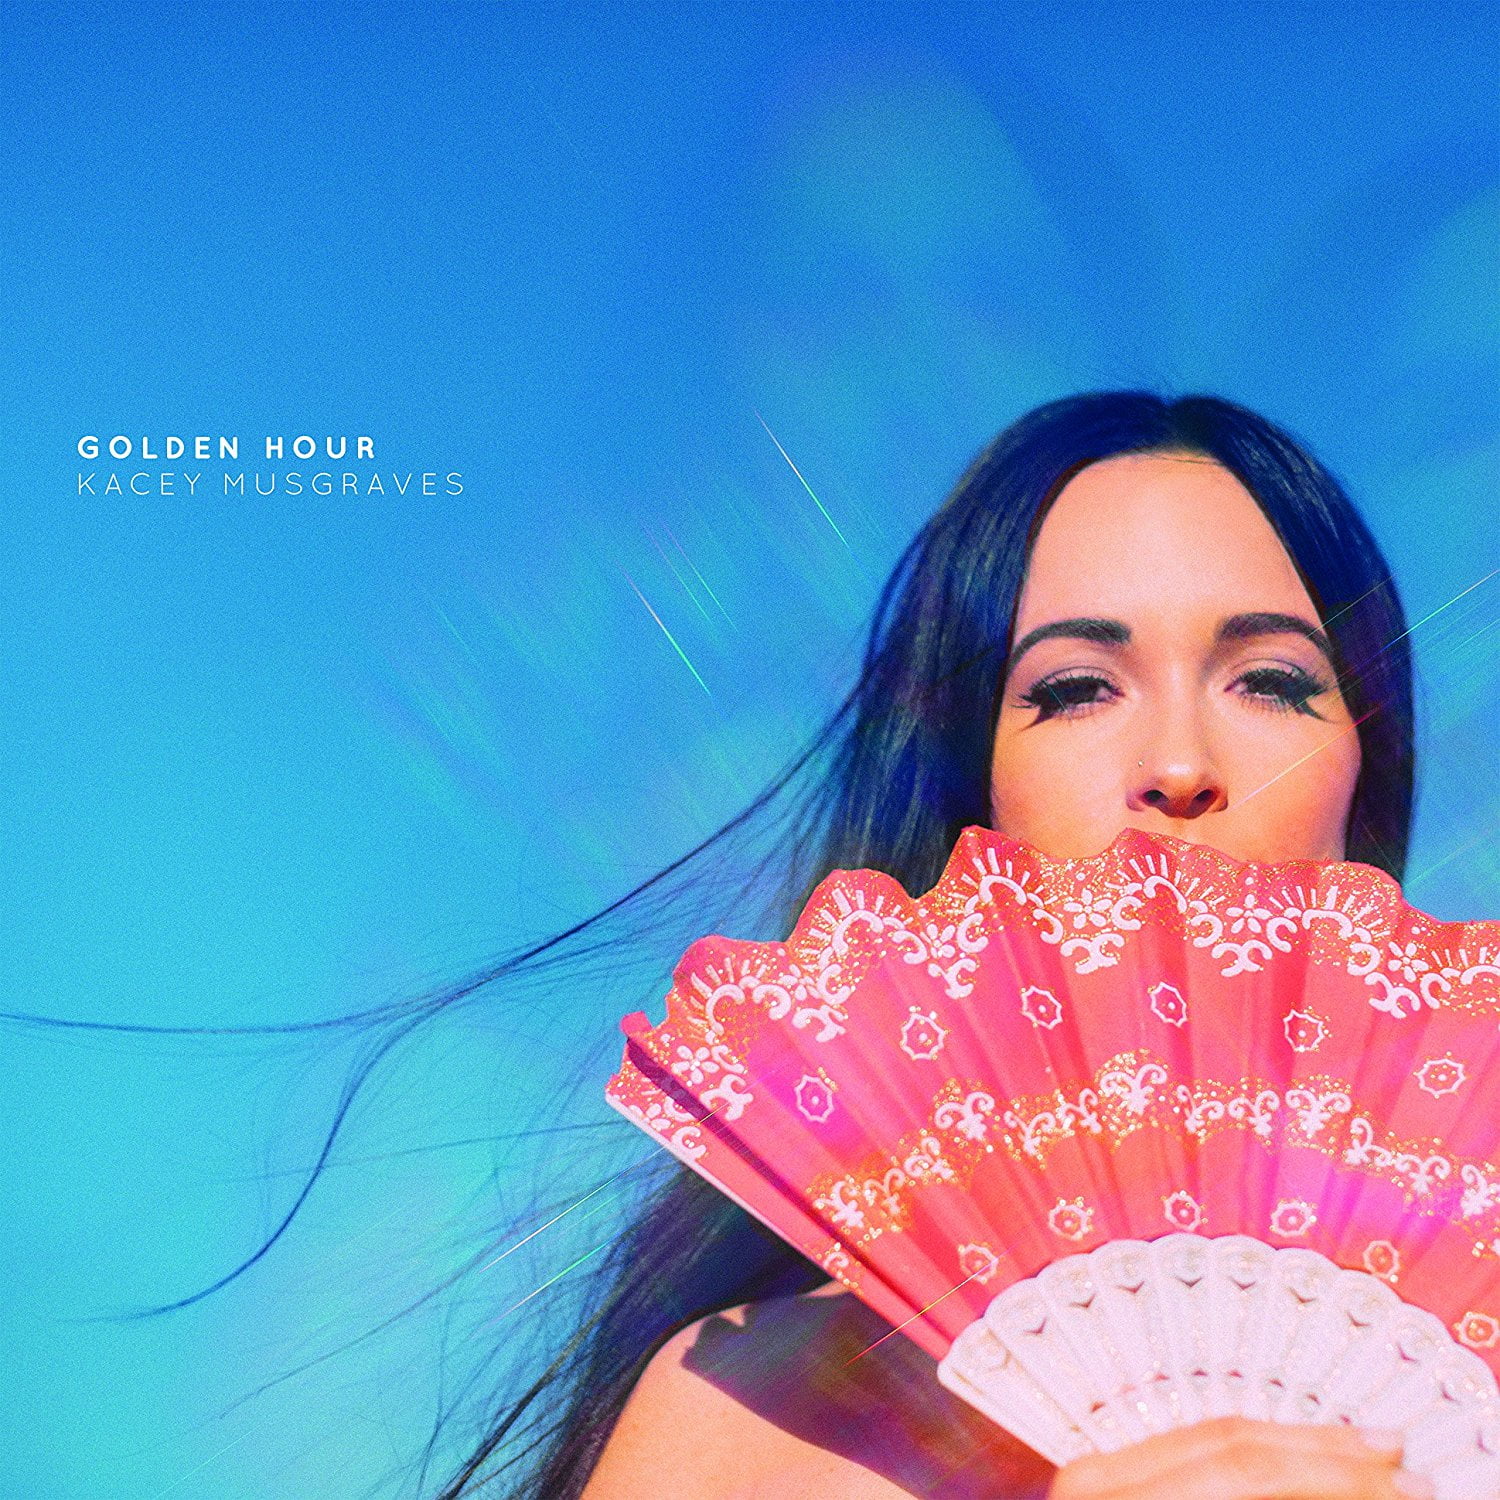 Kacey Musgraves, 'Oh What a World'